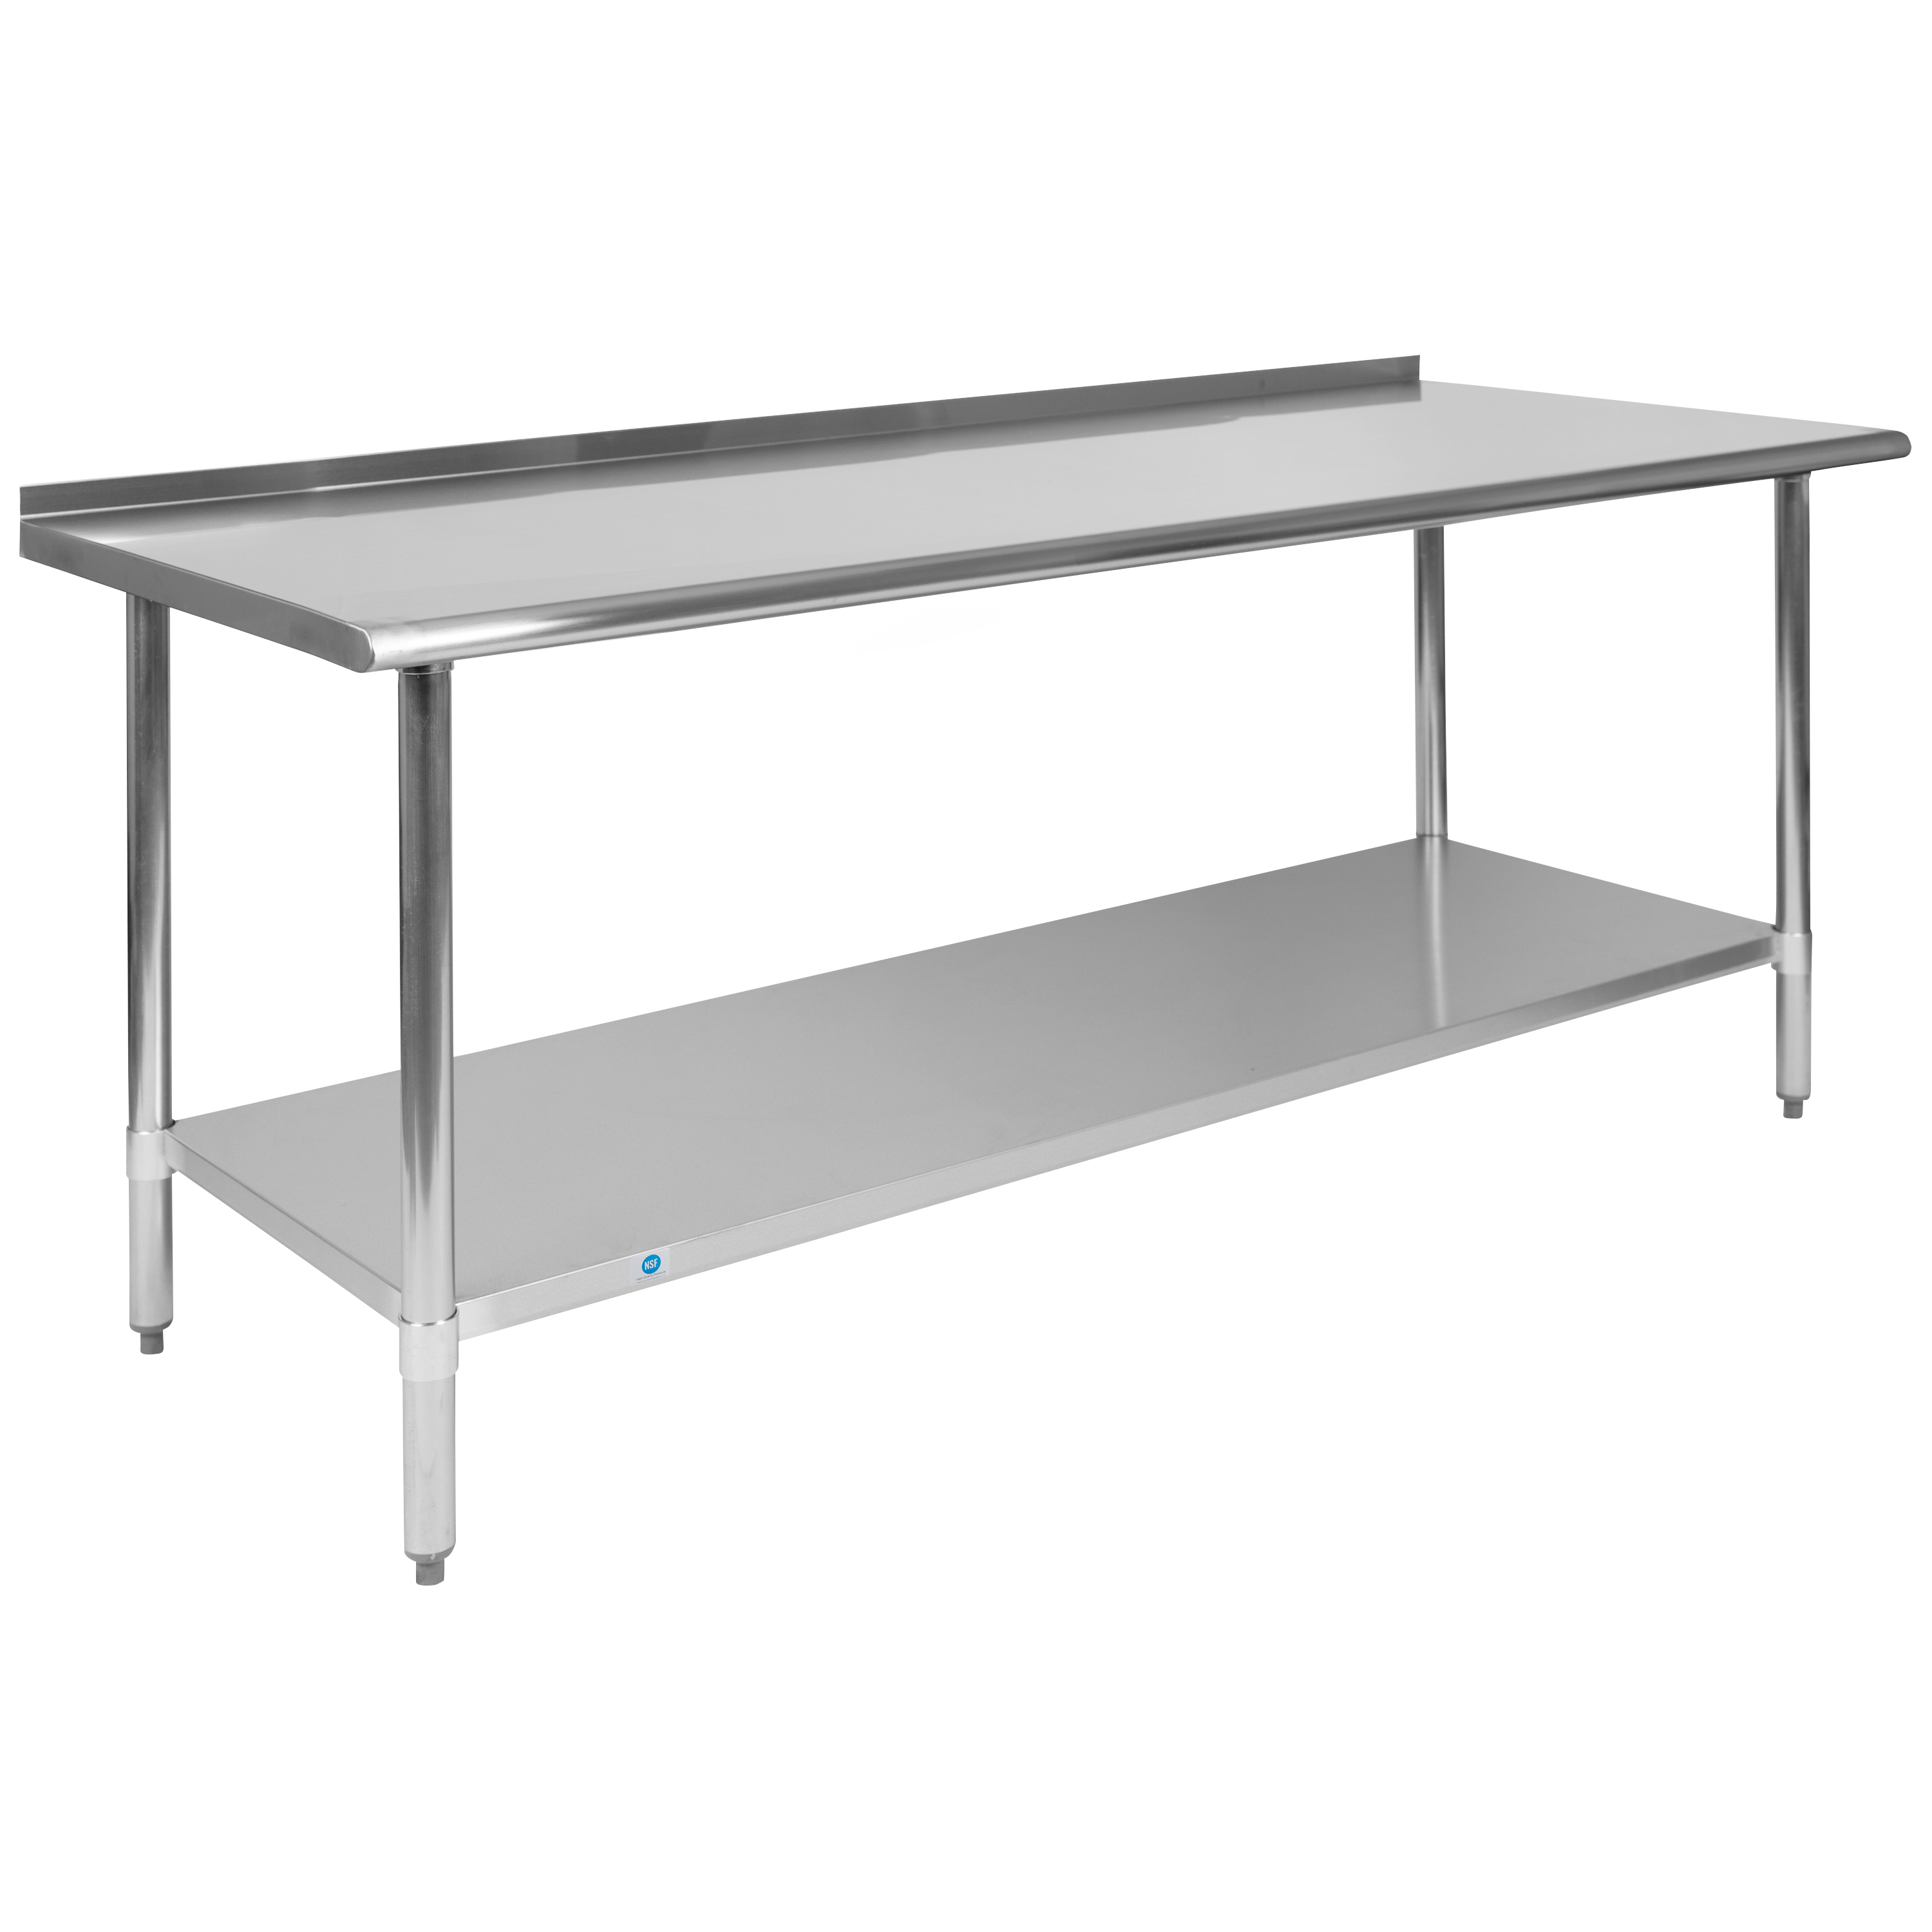 Flash Furniture NH-WT-3072BSP-GG Stainless Steel 18 Gauge Work Table with 1.5" Backsplash and Undershelf, 72"W x 30"D x 36"H